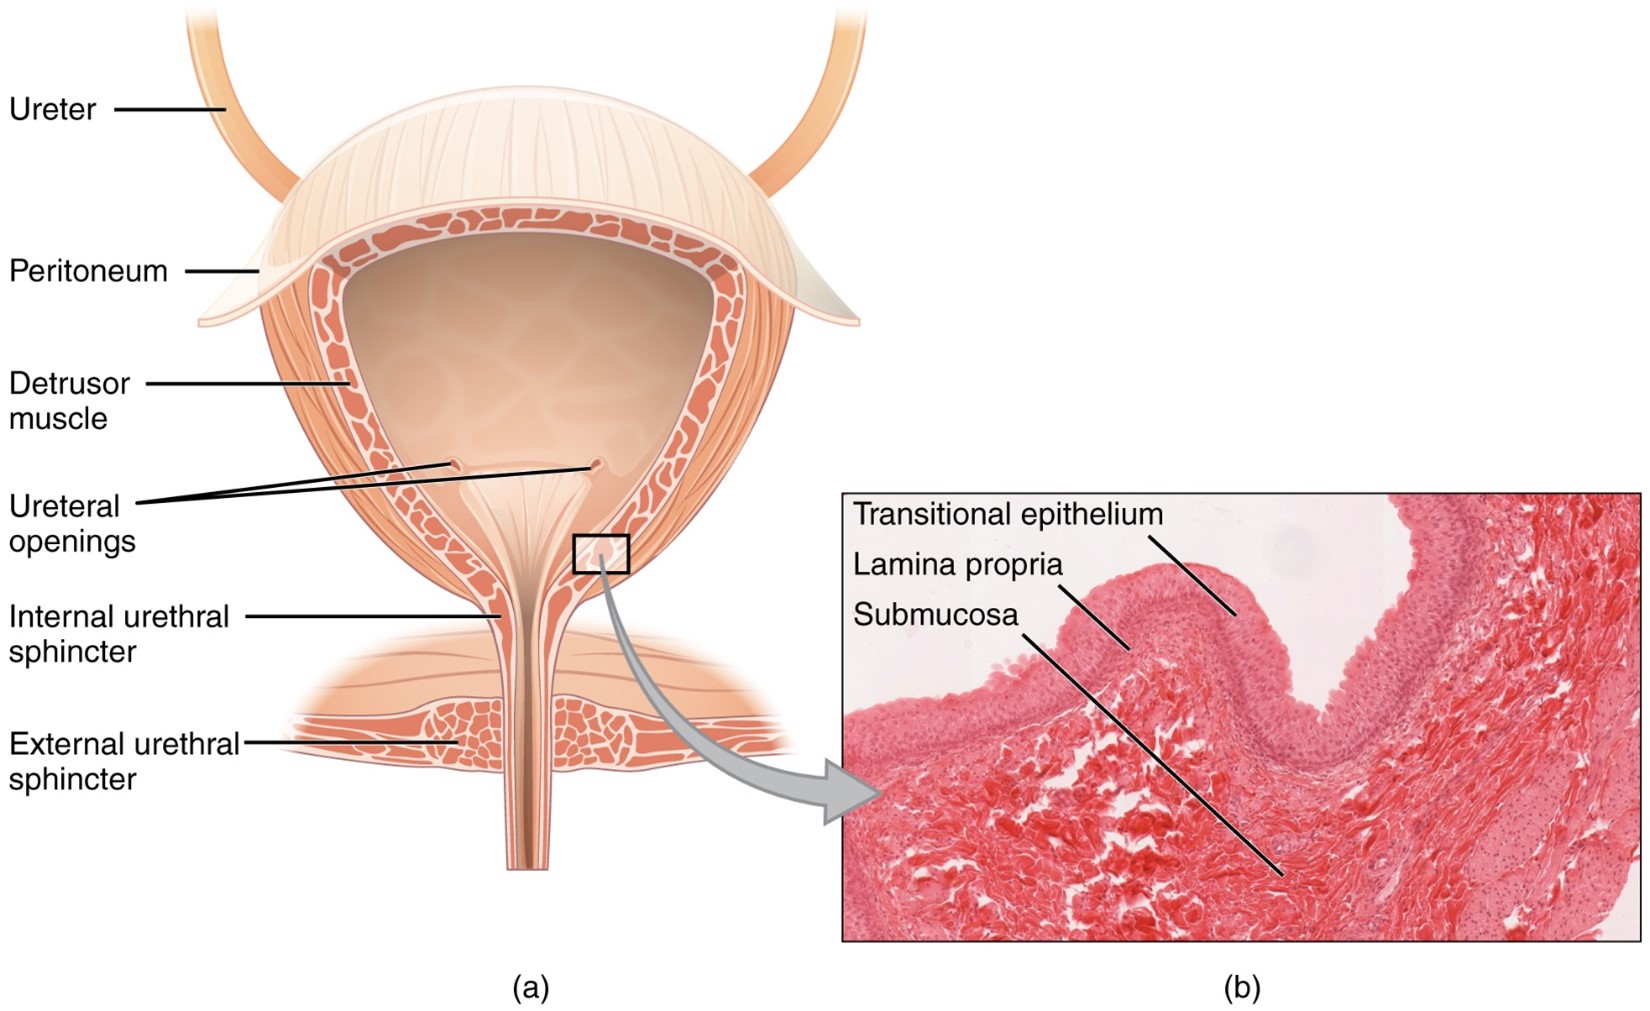 Anatomy of the bladder. Note the trigone is the triangular floor of the bladder between the ureteral opening and the urethra.